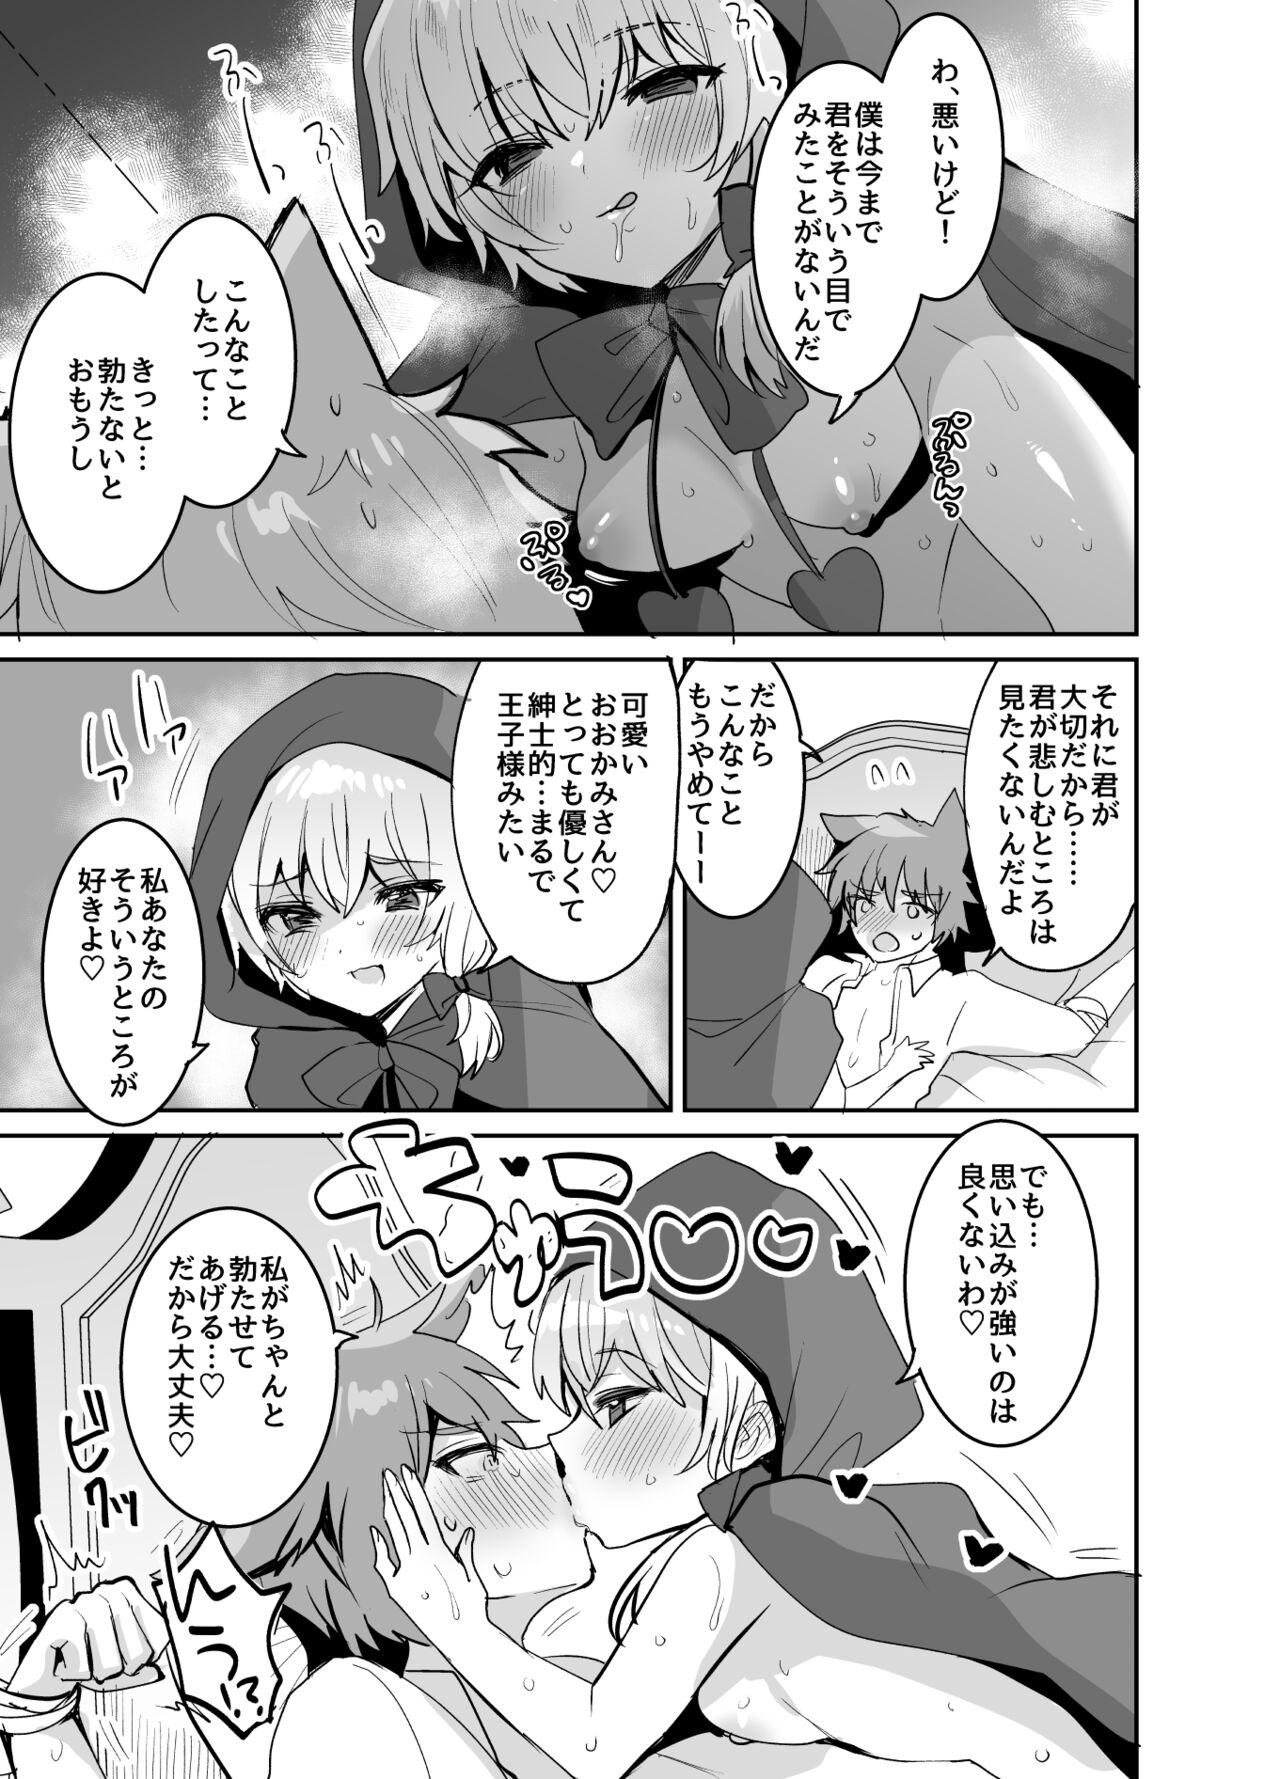 Camwhore 赤ずきんちゃんに犯される!! - Little red riding hood Indonesian - Page 10